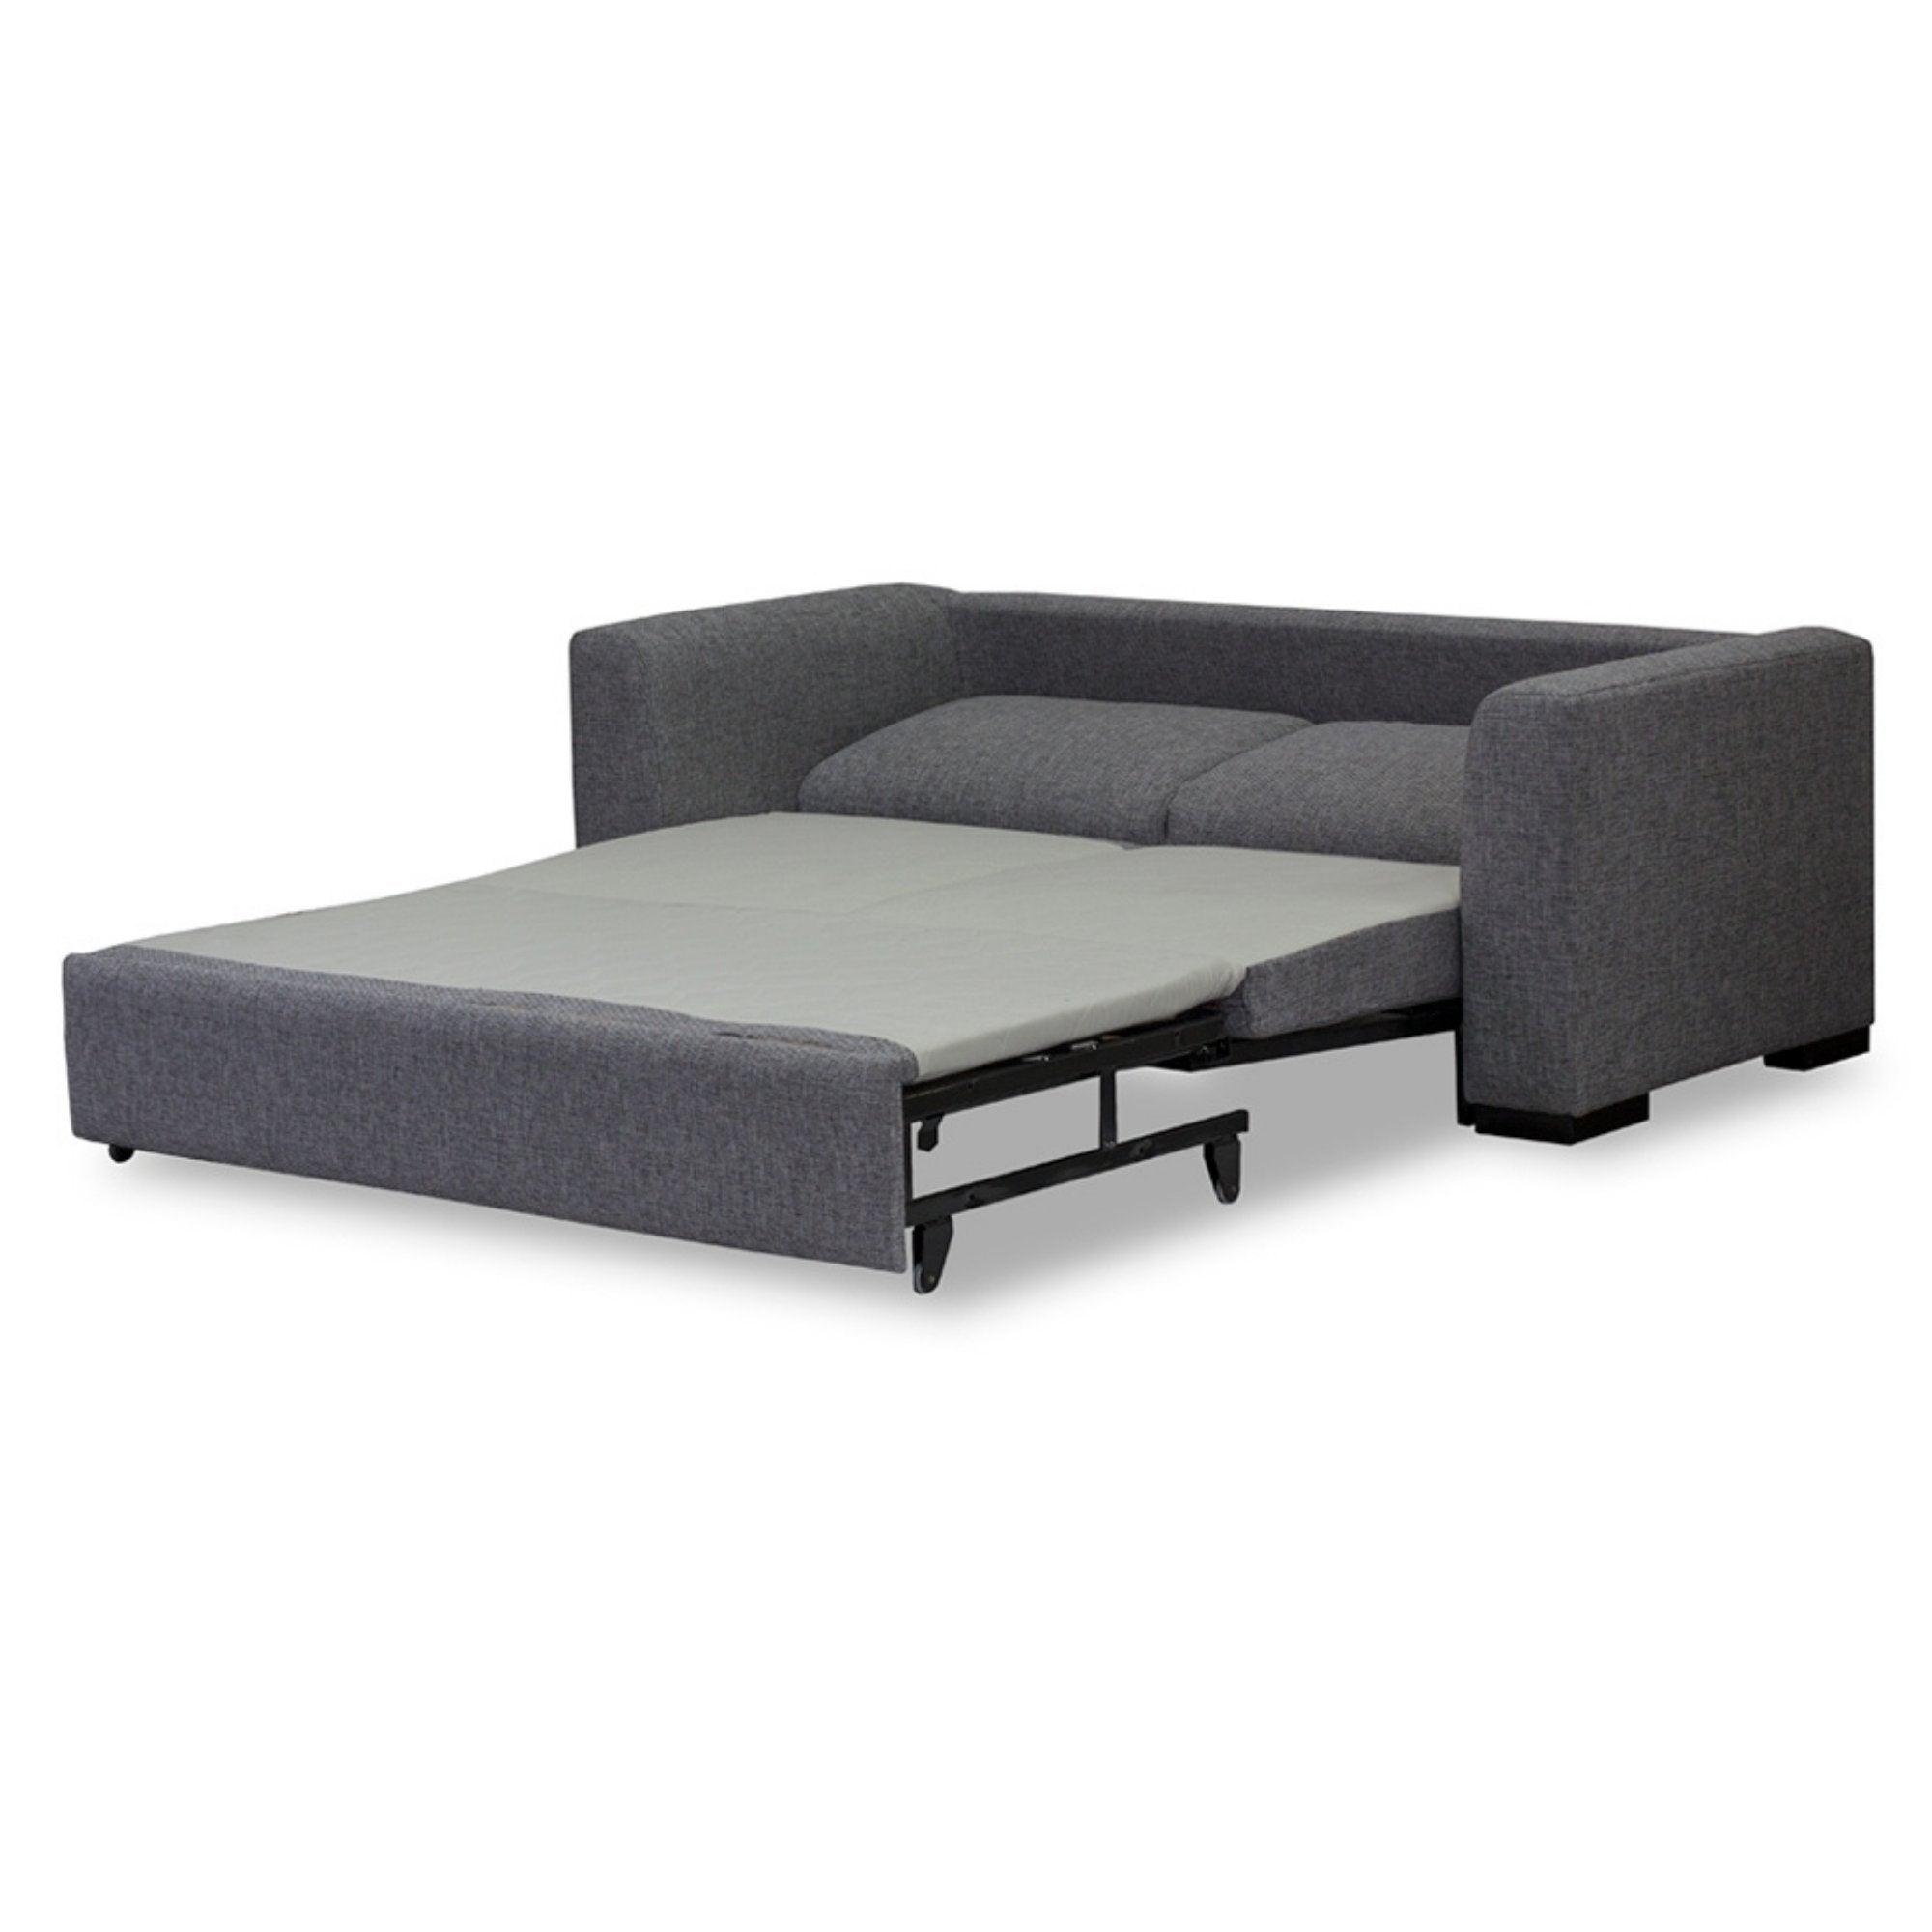 SOFABEDS | Christchurch | The Best Furniture Shop